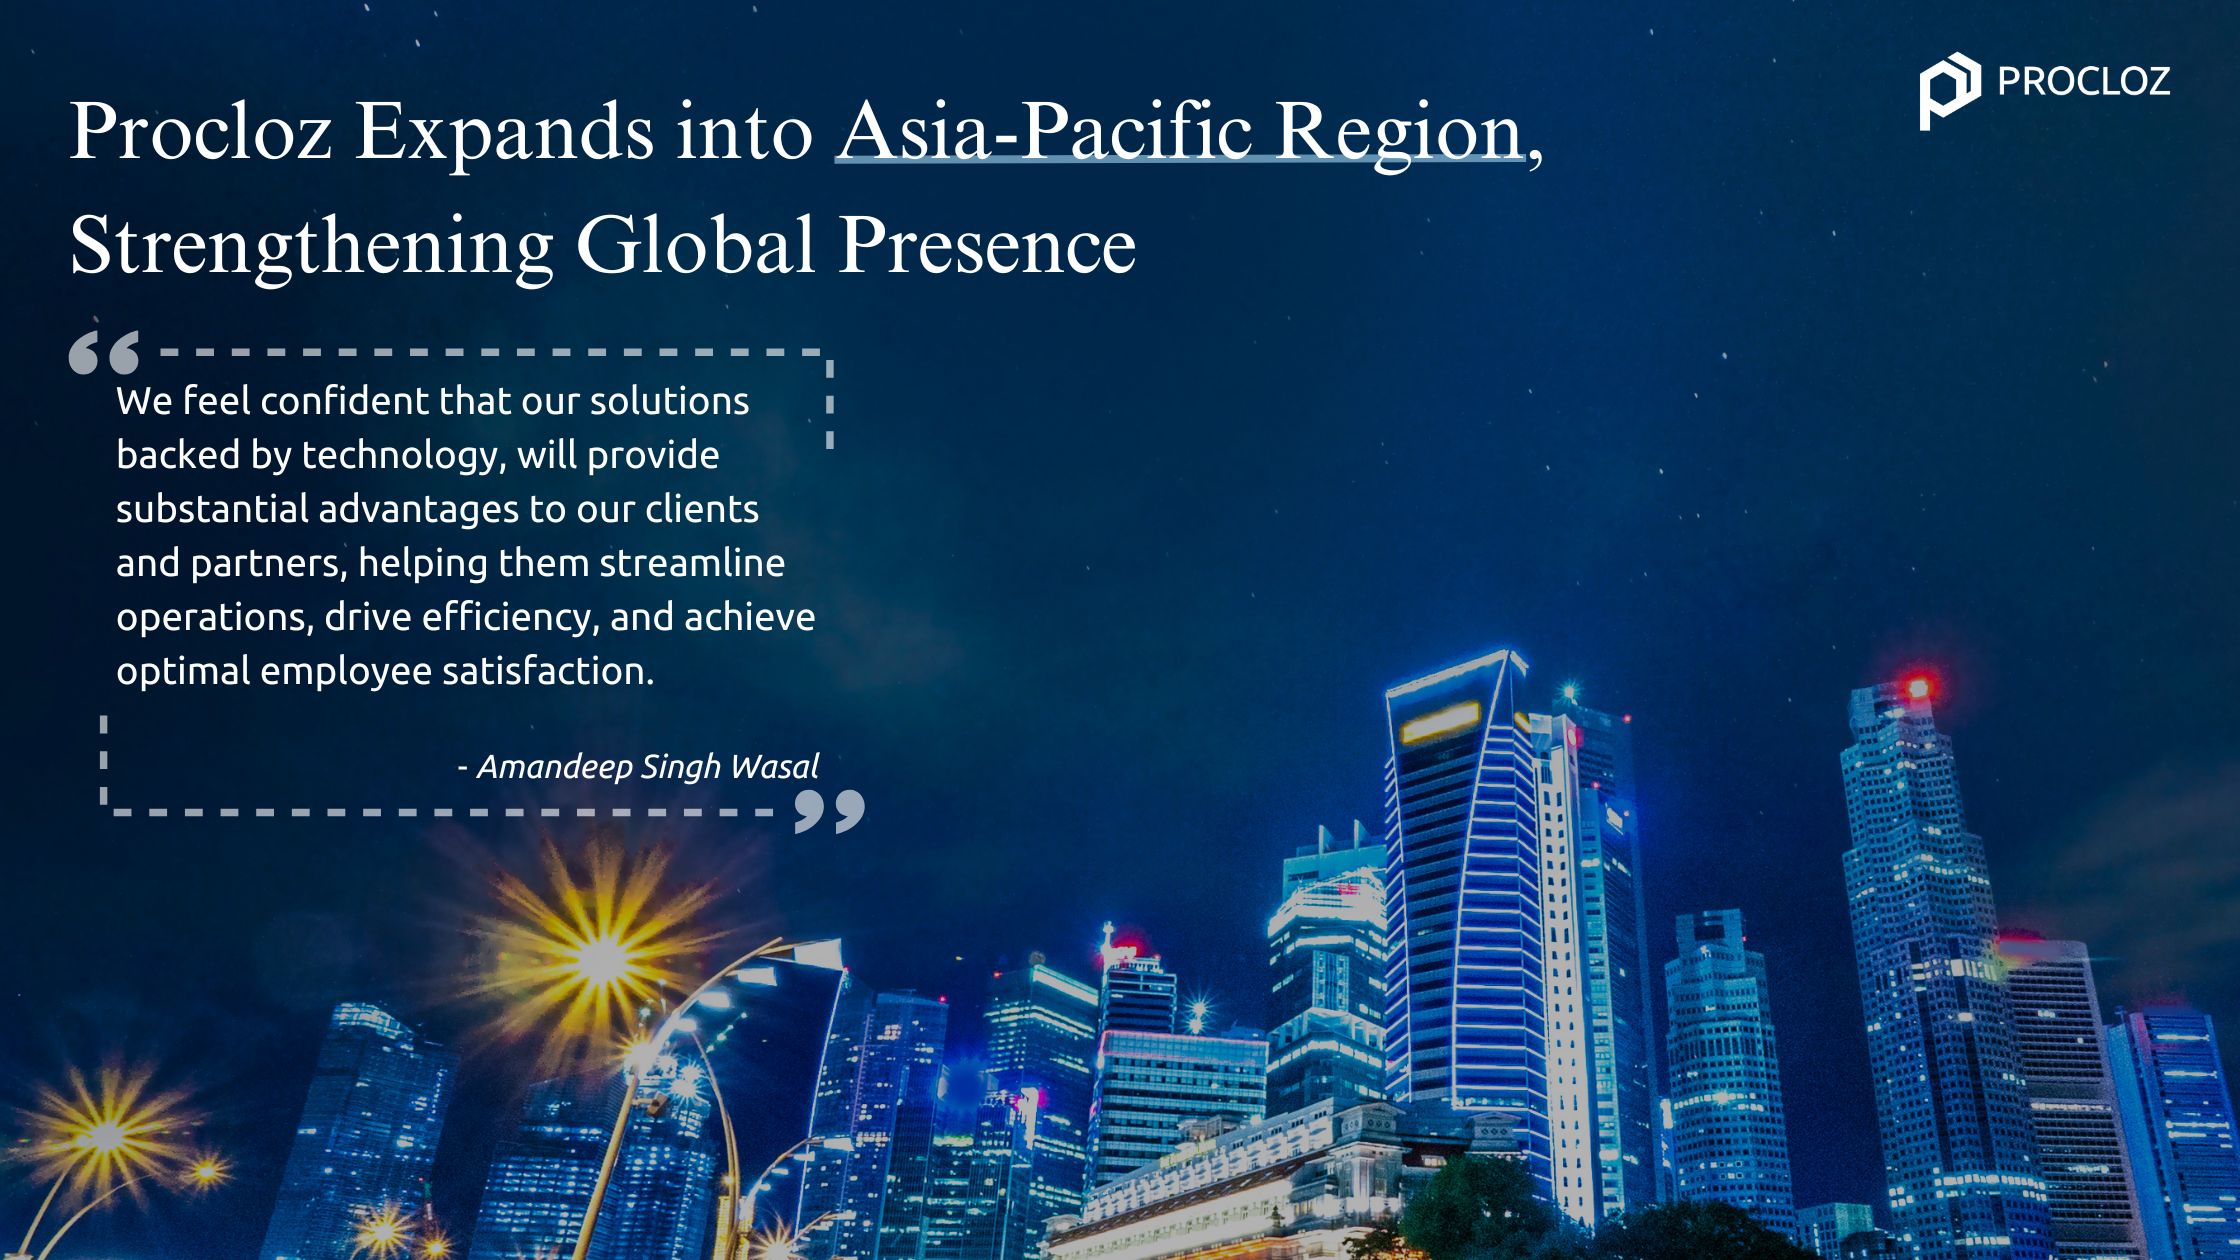 Procloz Expands in the APAC region